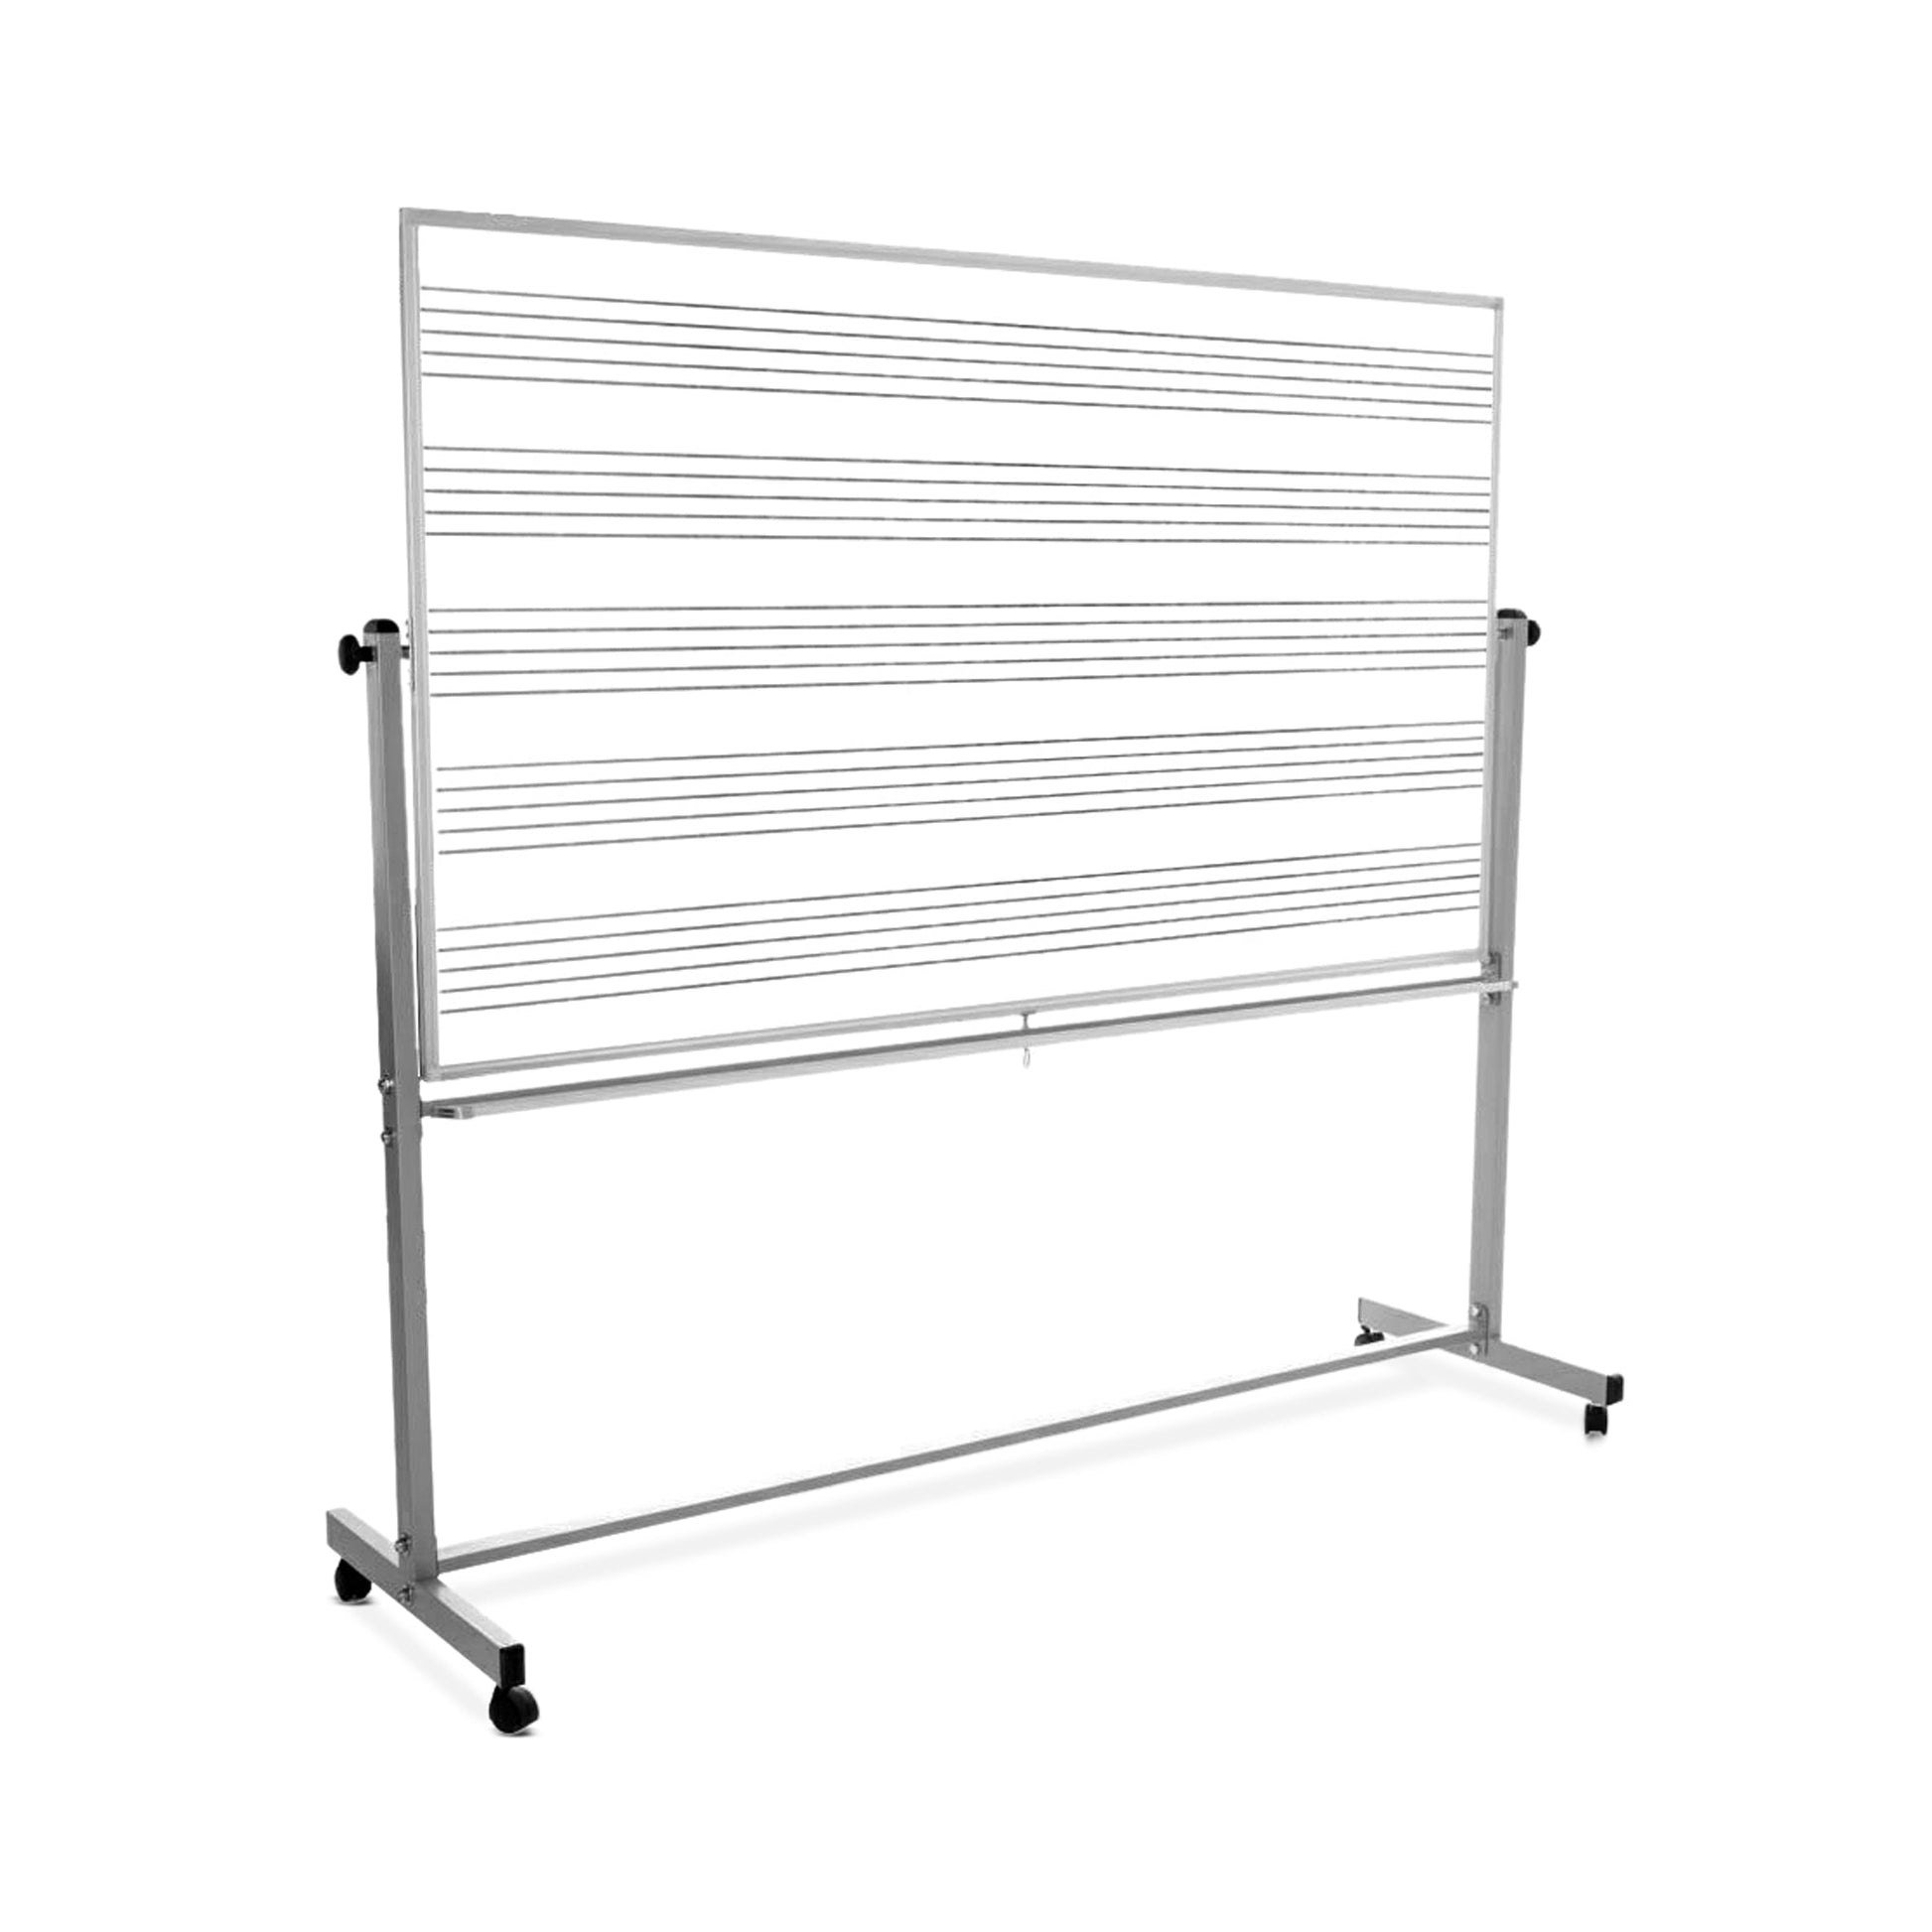 72"W x 48"H Mobile Whiteboard - Double-sided Music Whiteboard Magnetic dry erase markerboard - Luxor MB7248MM - SchoolOutlet